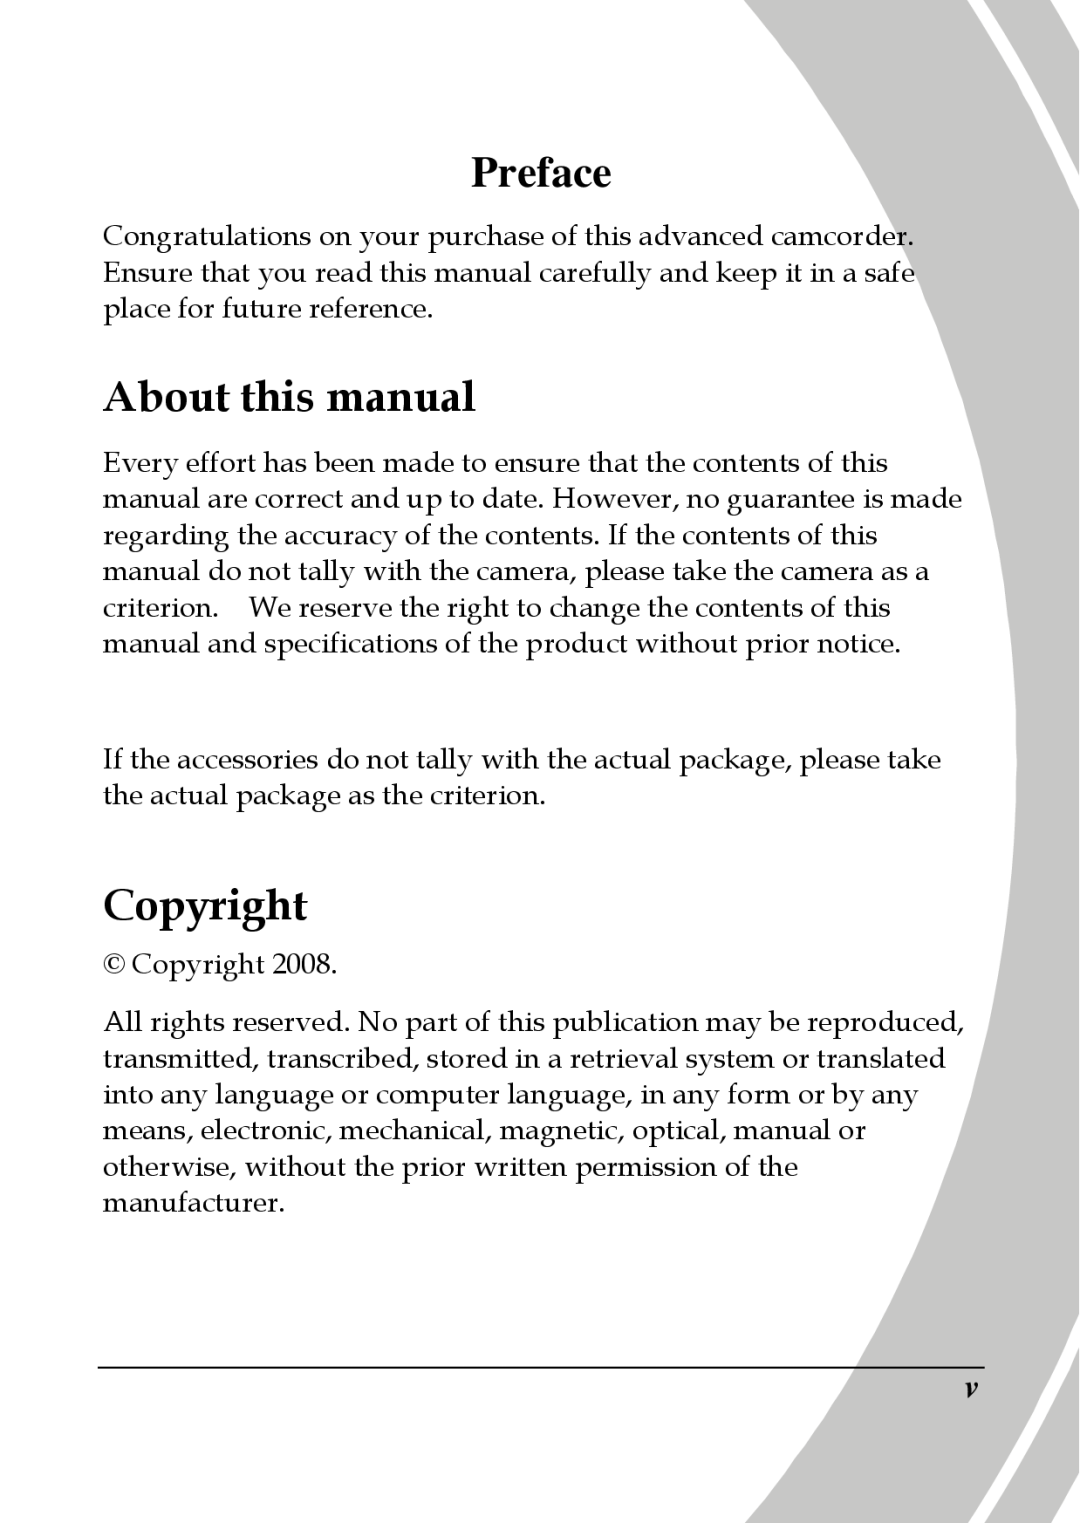 DXG Technology DXG-595V About this manual, Copyright, Preface 